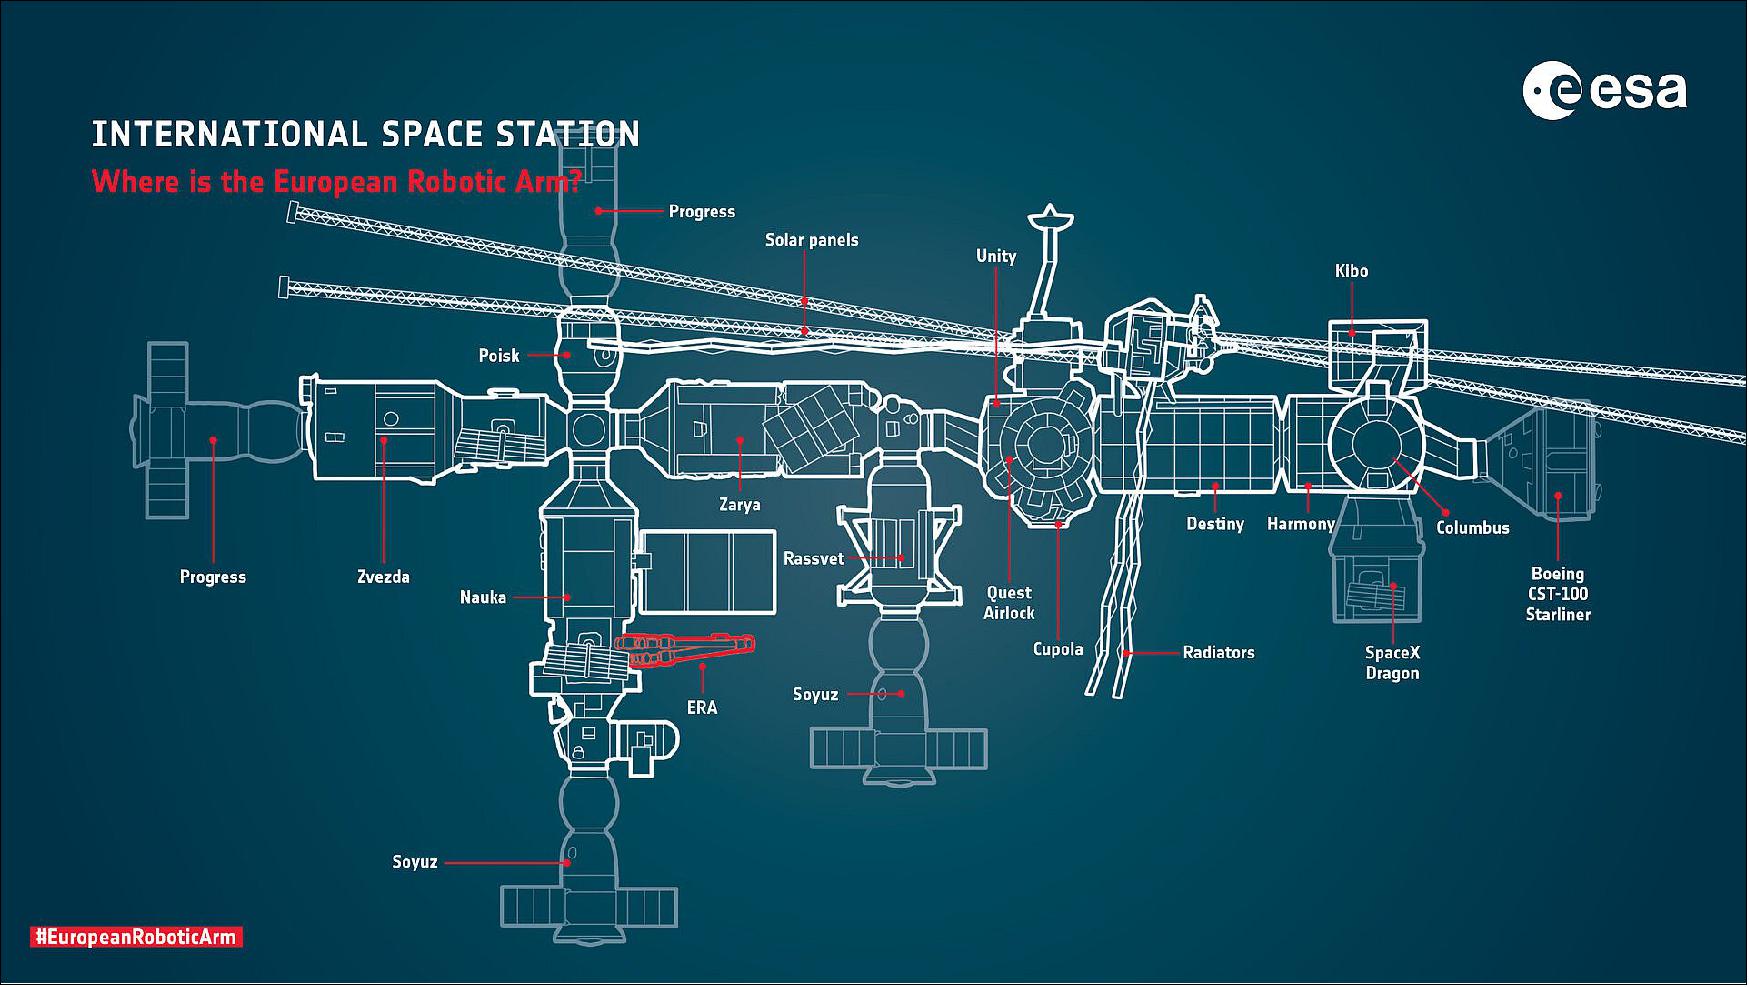 Figure 15: Infographic of ISS modules and structures after Nauka arrives and is properly installed at the station - along with the location of the European Robotic Arm on the International Space Station (image credit: ESA) 11)